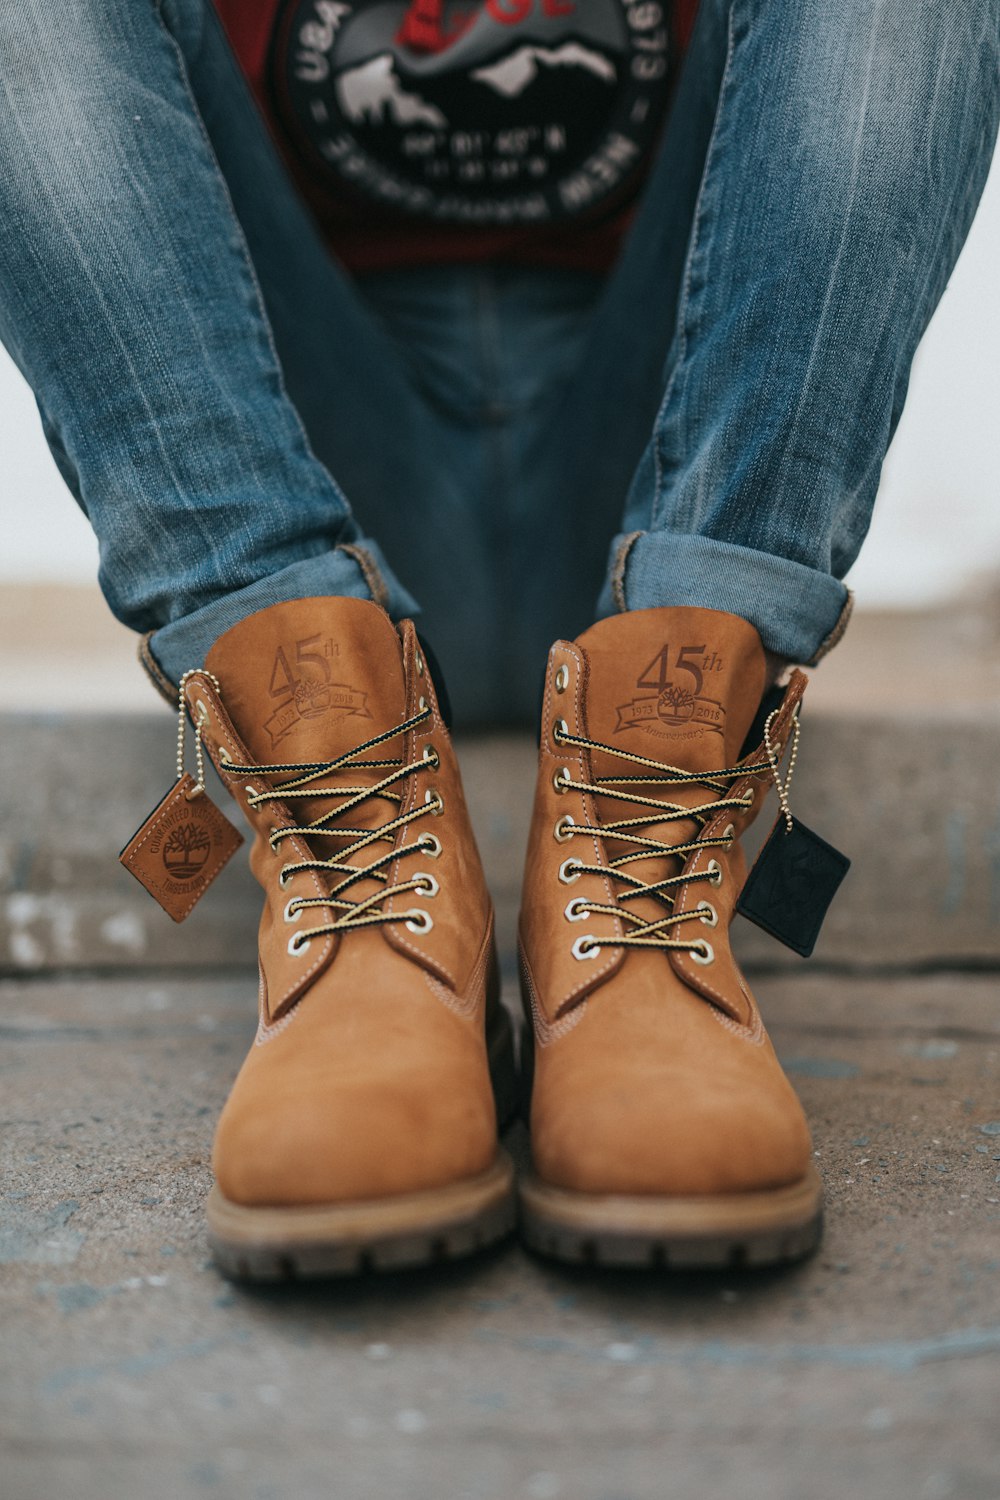 Pair of brown leather work boots photo – Free Shoes Image on Unsplash